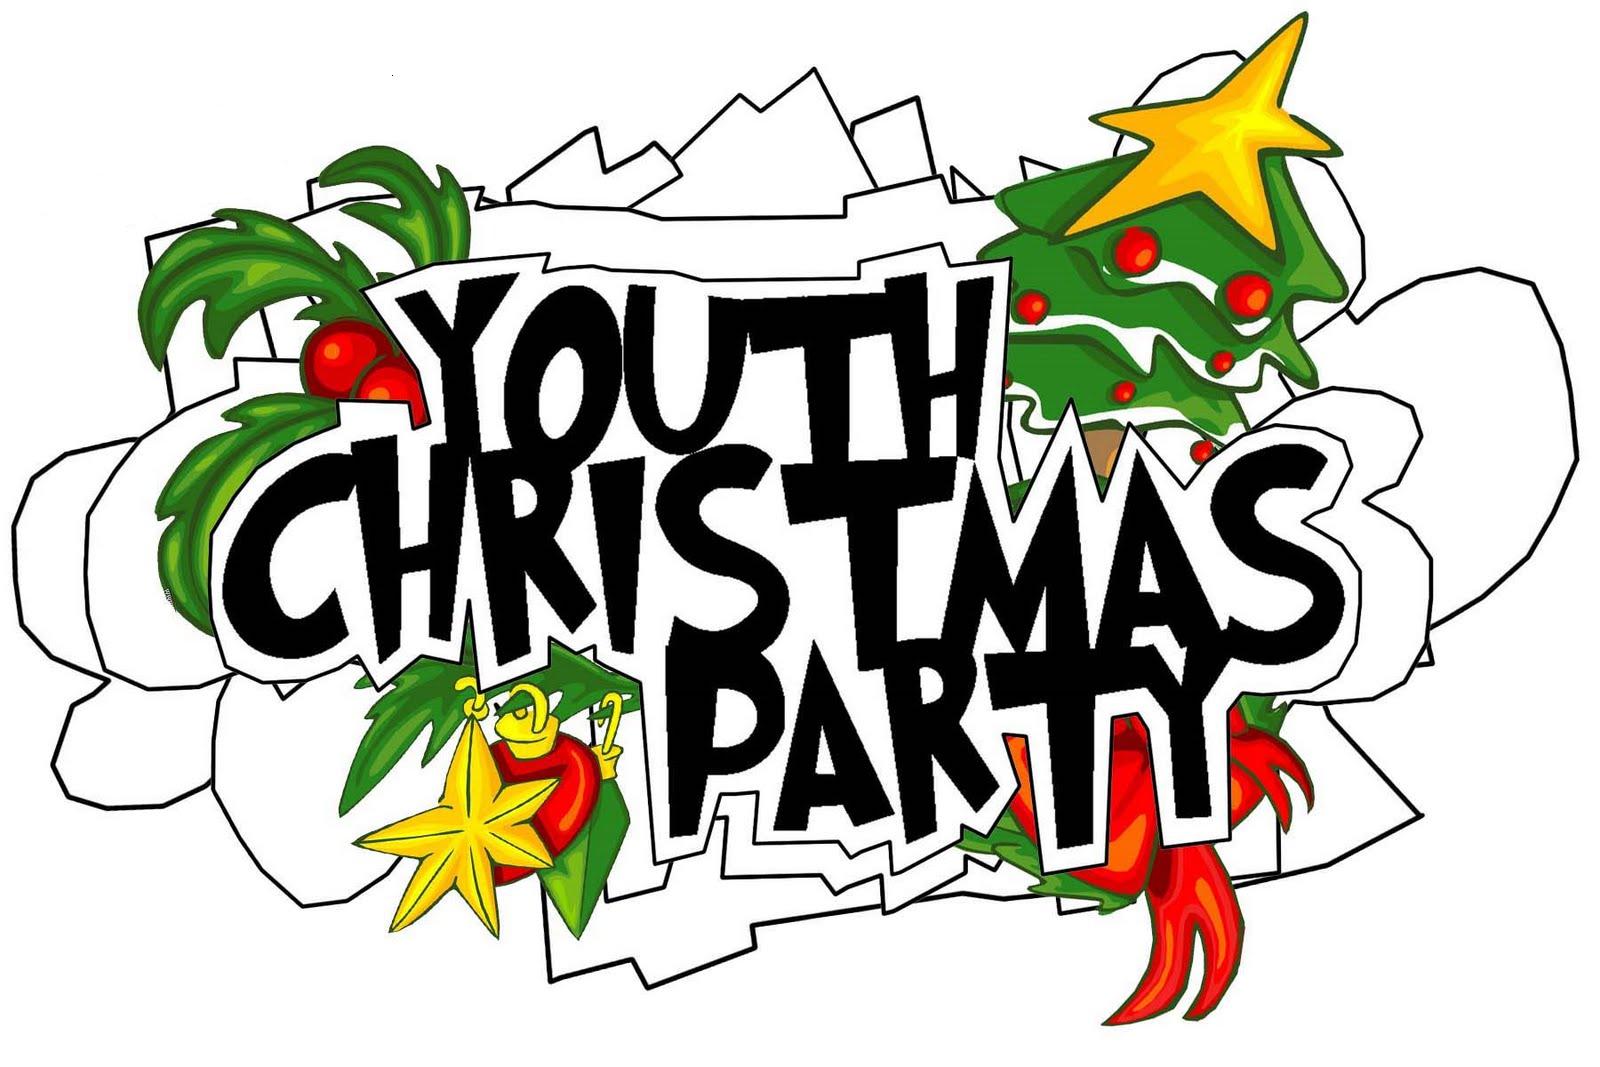 Youth christmas party clipart - Cliparting.com